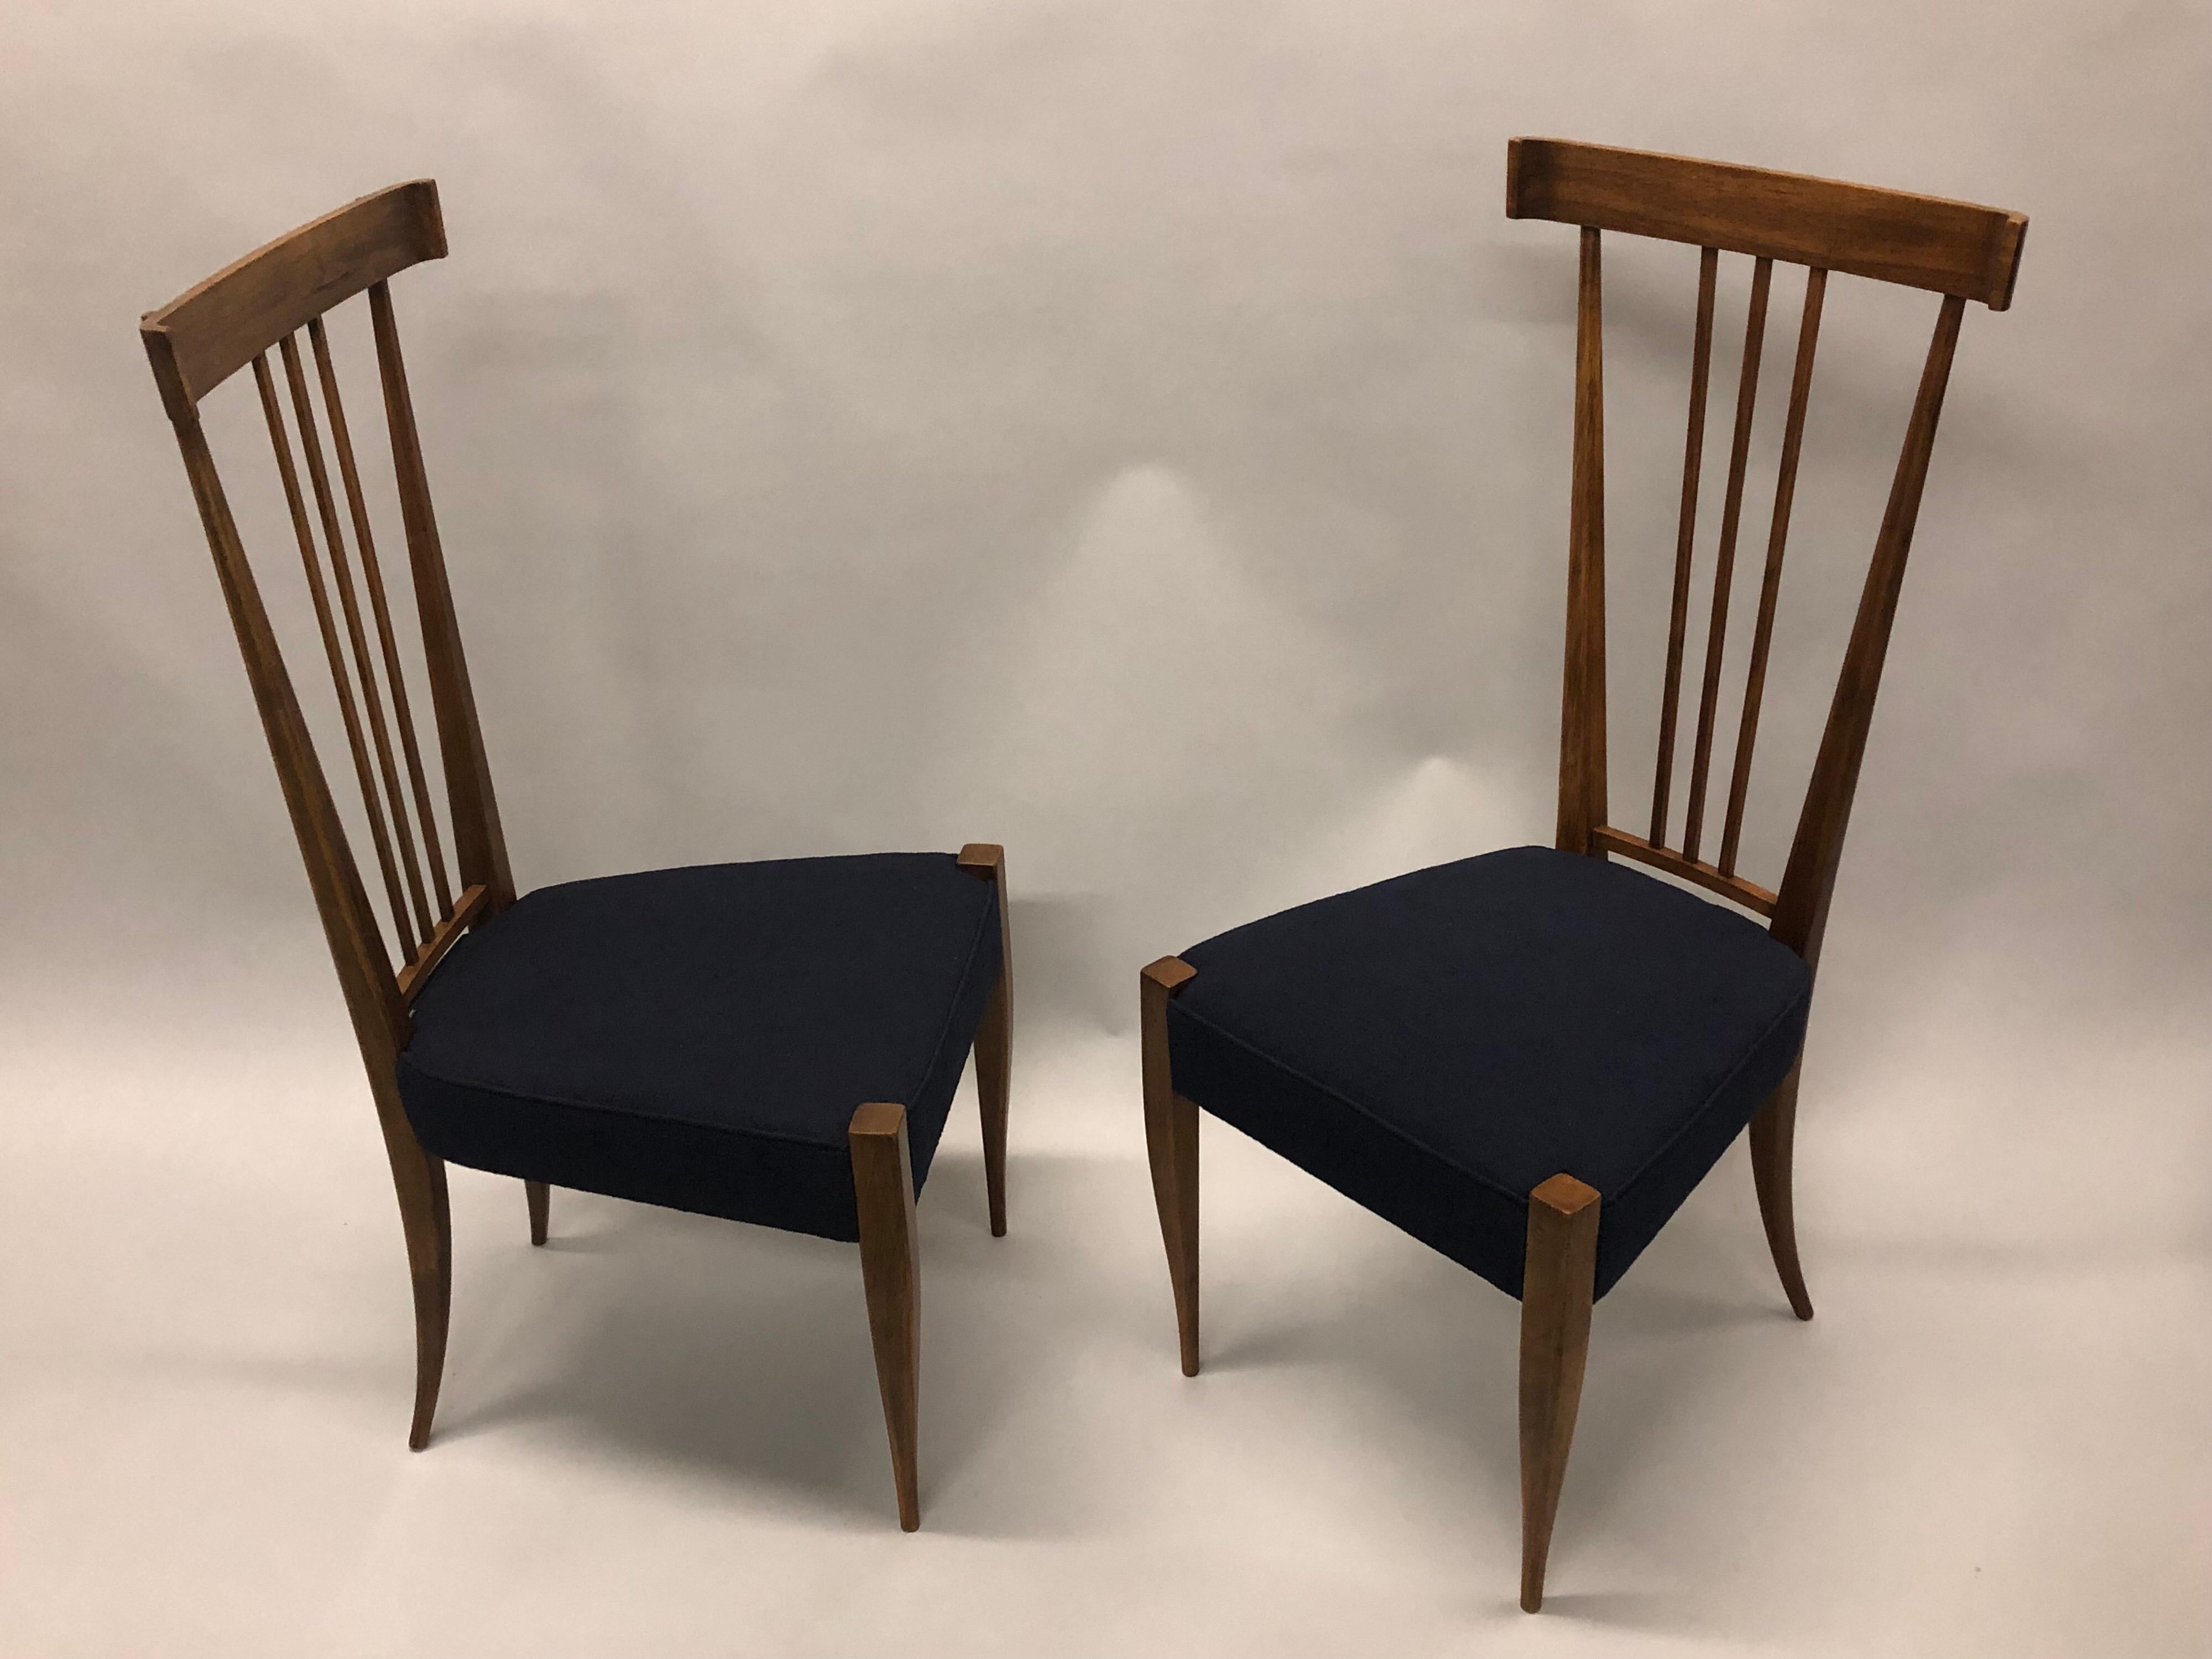 Pair of Italian Midcentury Modern Walnut Side Chairs, Circle of Gio Ponti In Good Condition For Sale In New York, NY